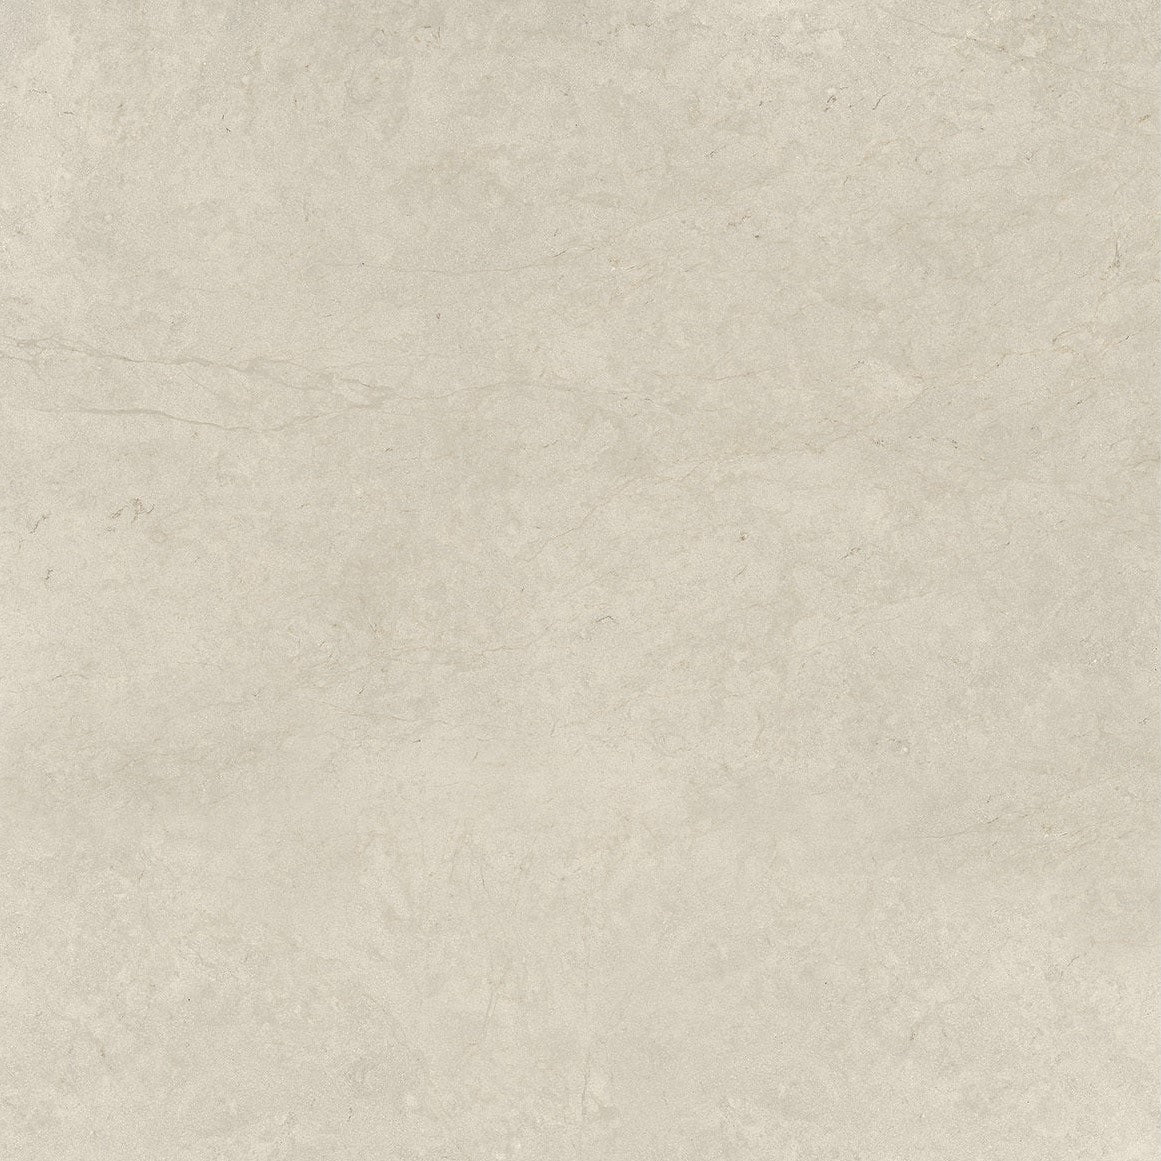 tierra halo limestone beige stone tile  sold by surface group